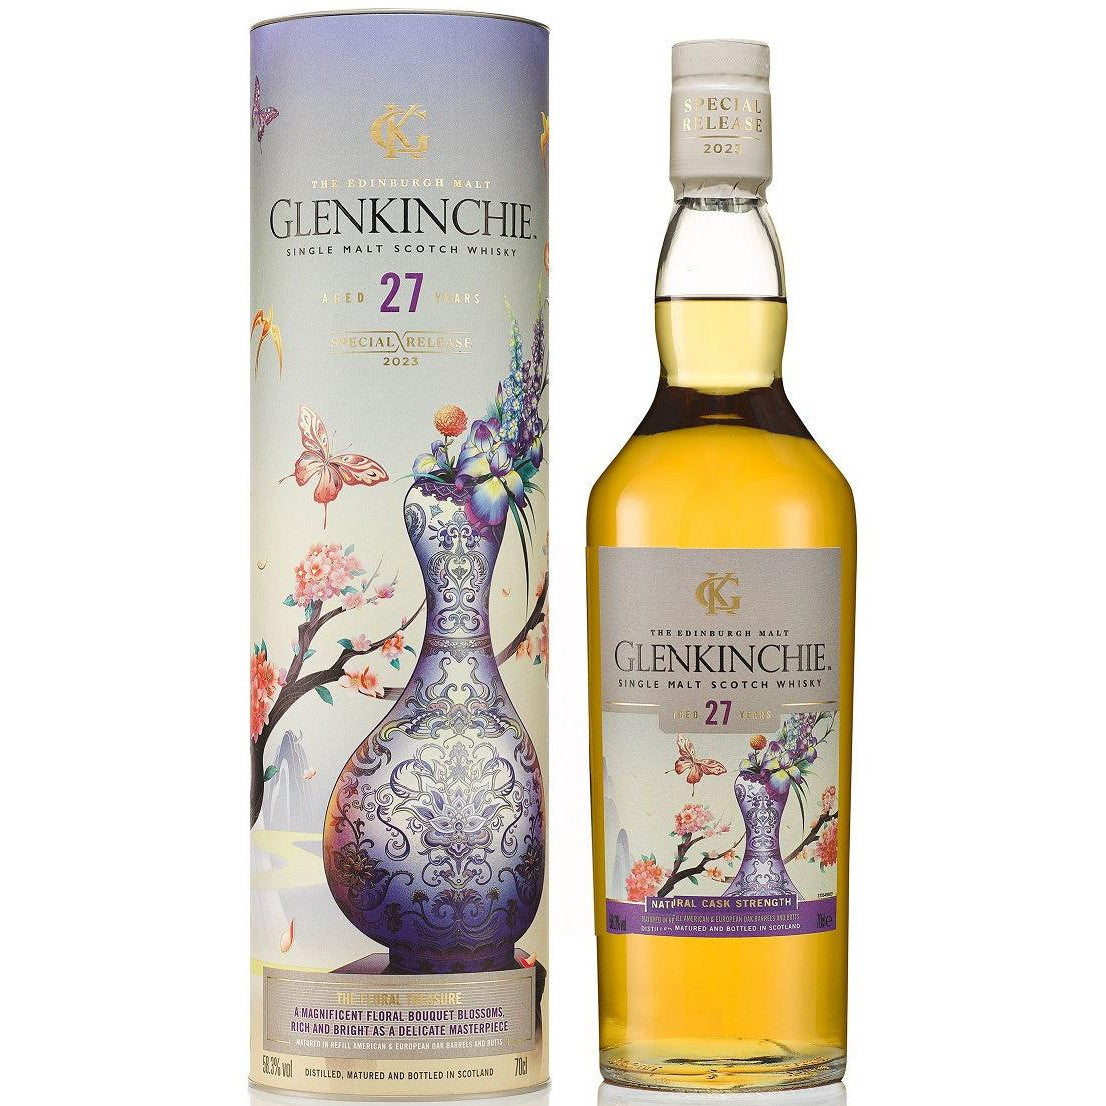 Glenkinchie "The Floral Treasure" 27 Year Old Single Malt Scotch Whisky Special Release 2023 700ml